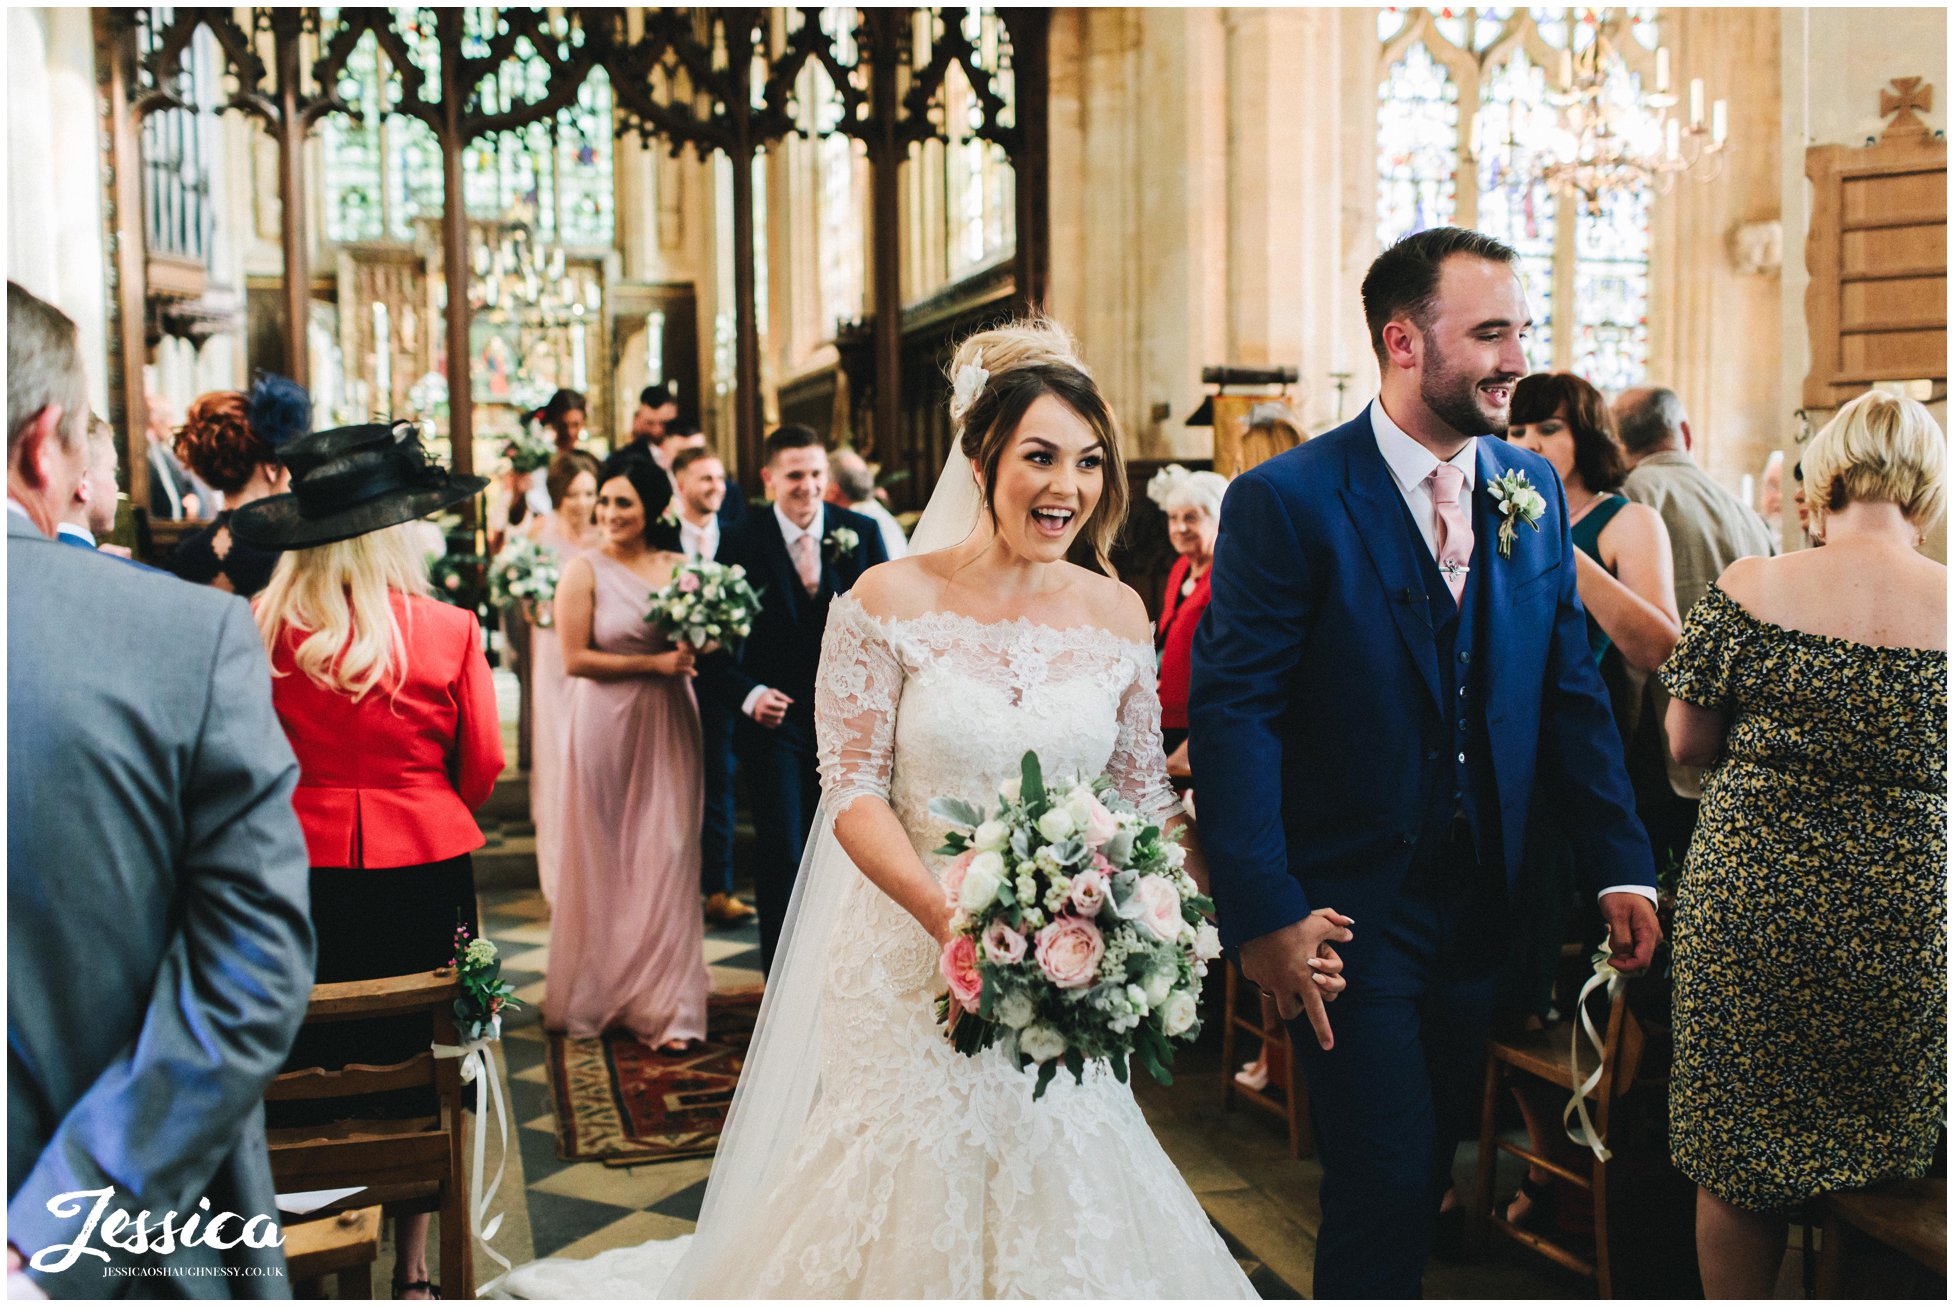 the couple walk back down the aisle as husband and wife